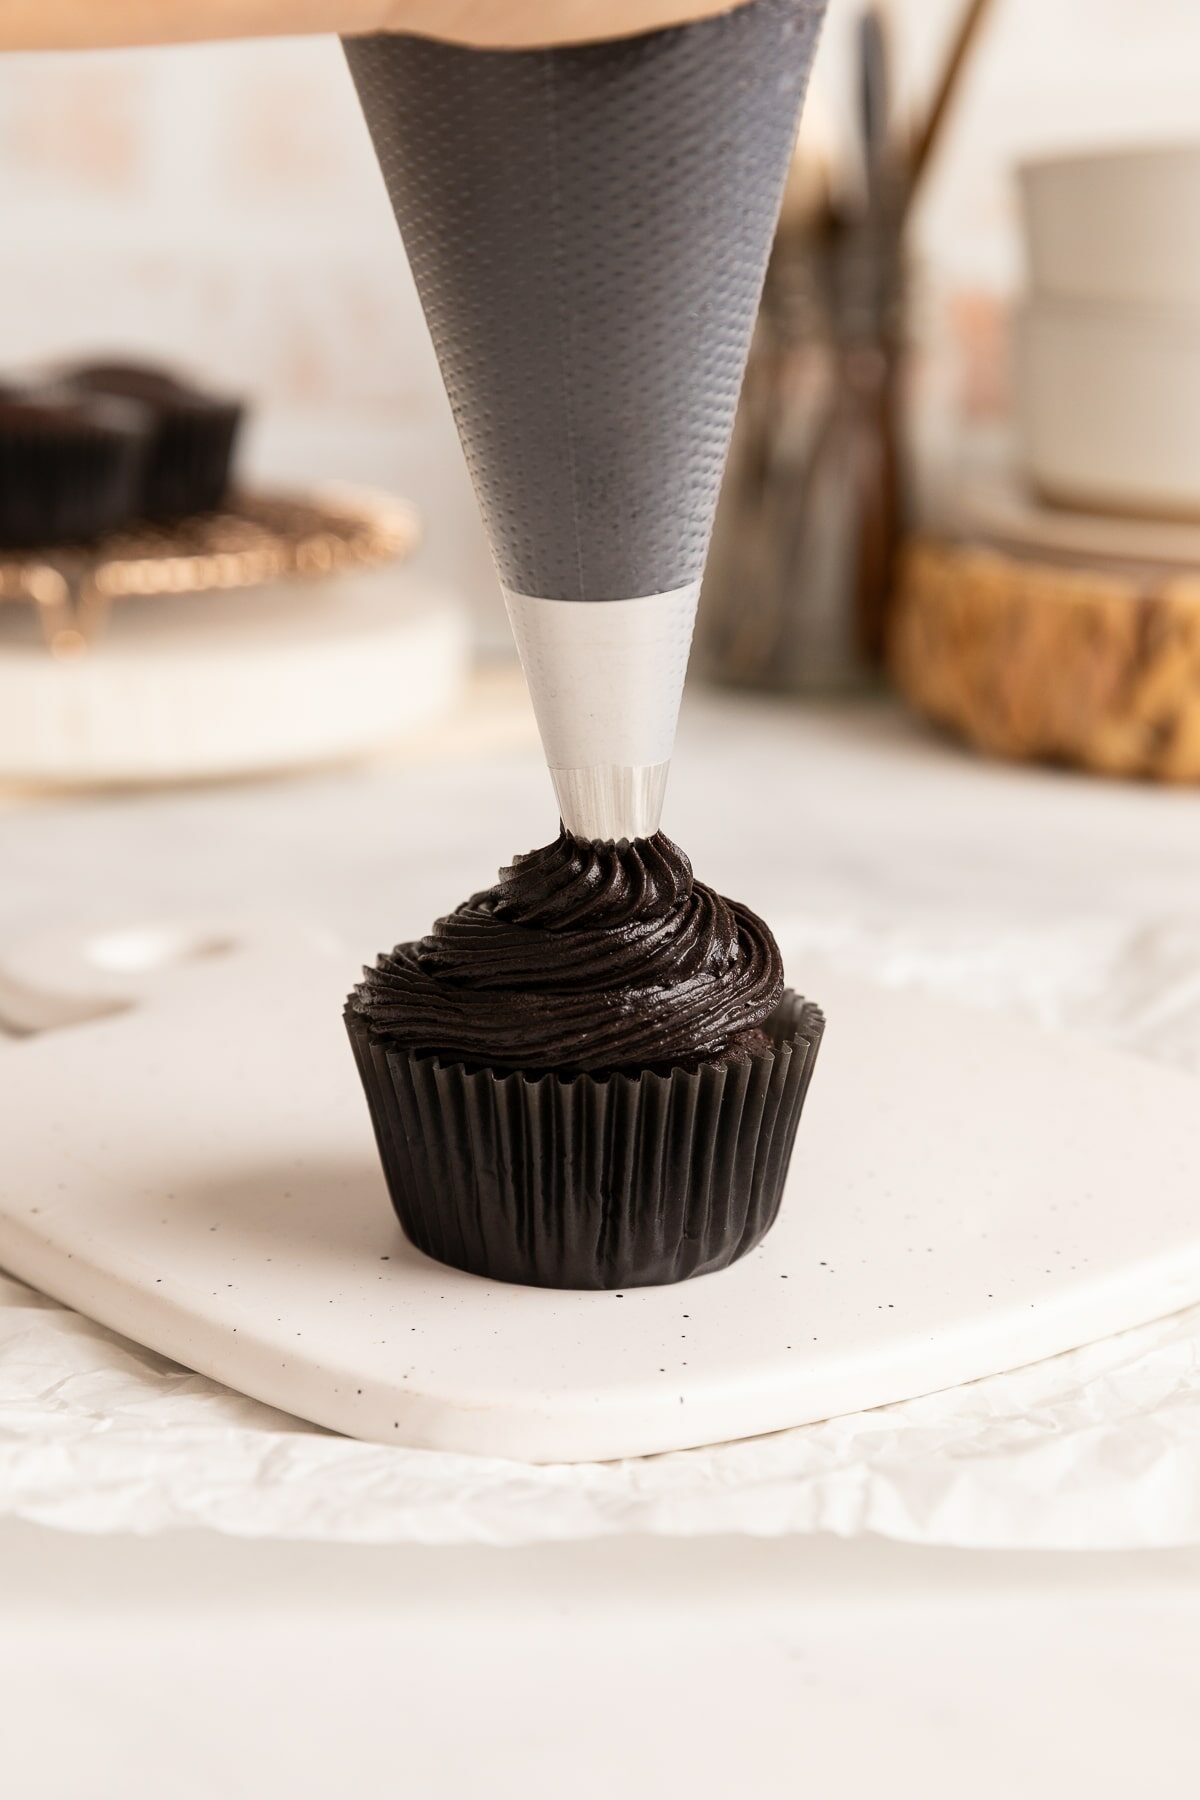 piping black frosting on cupcake.